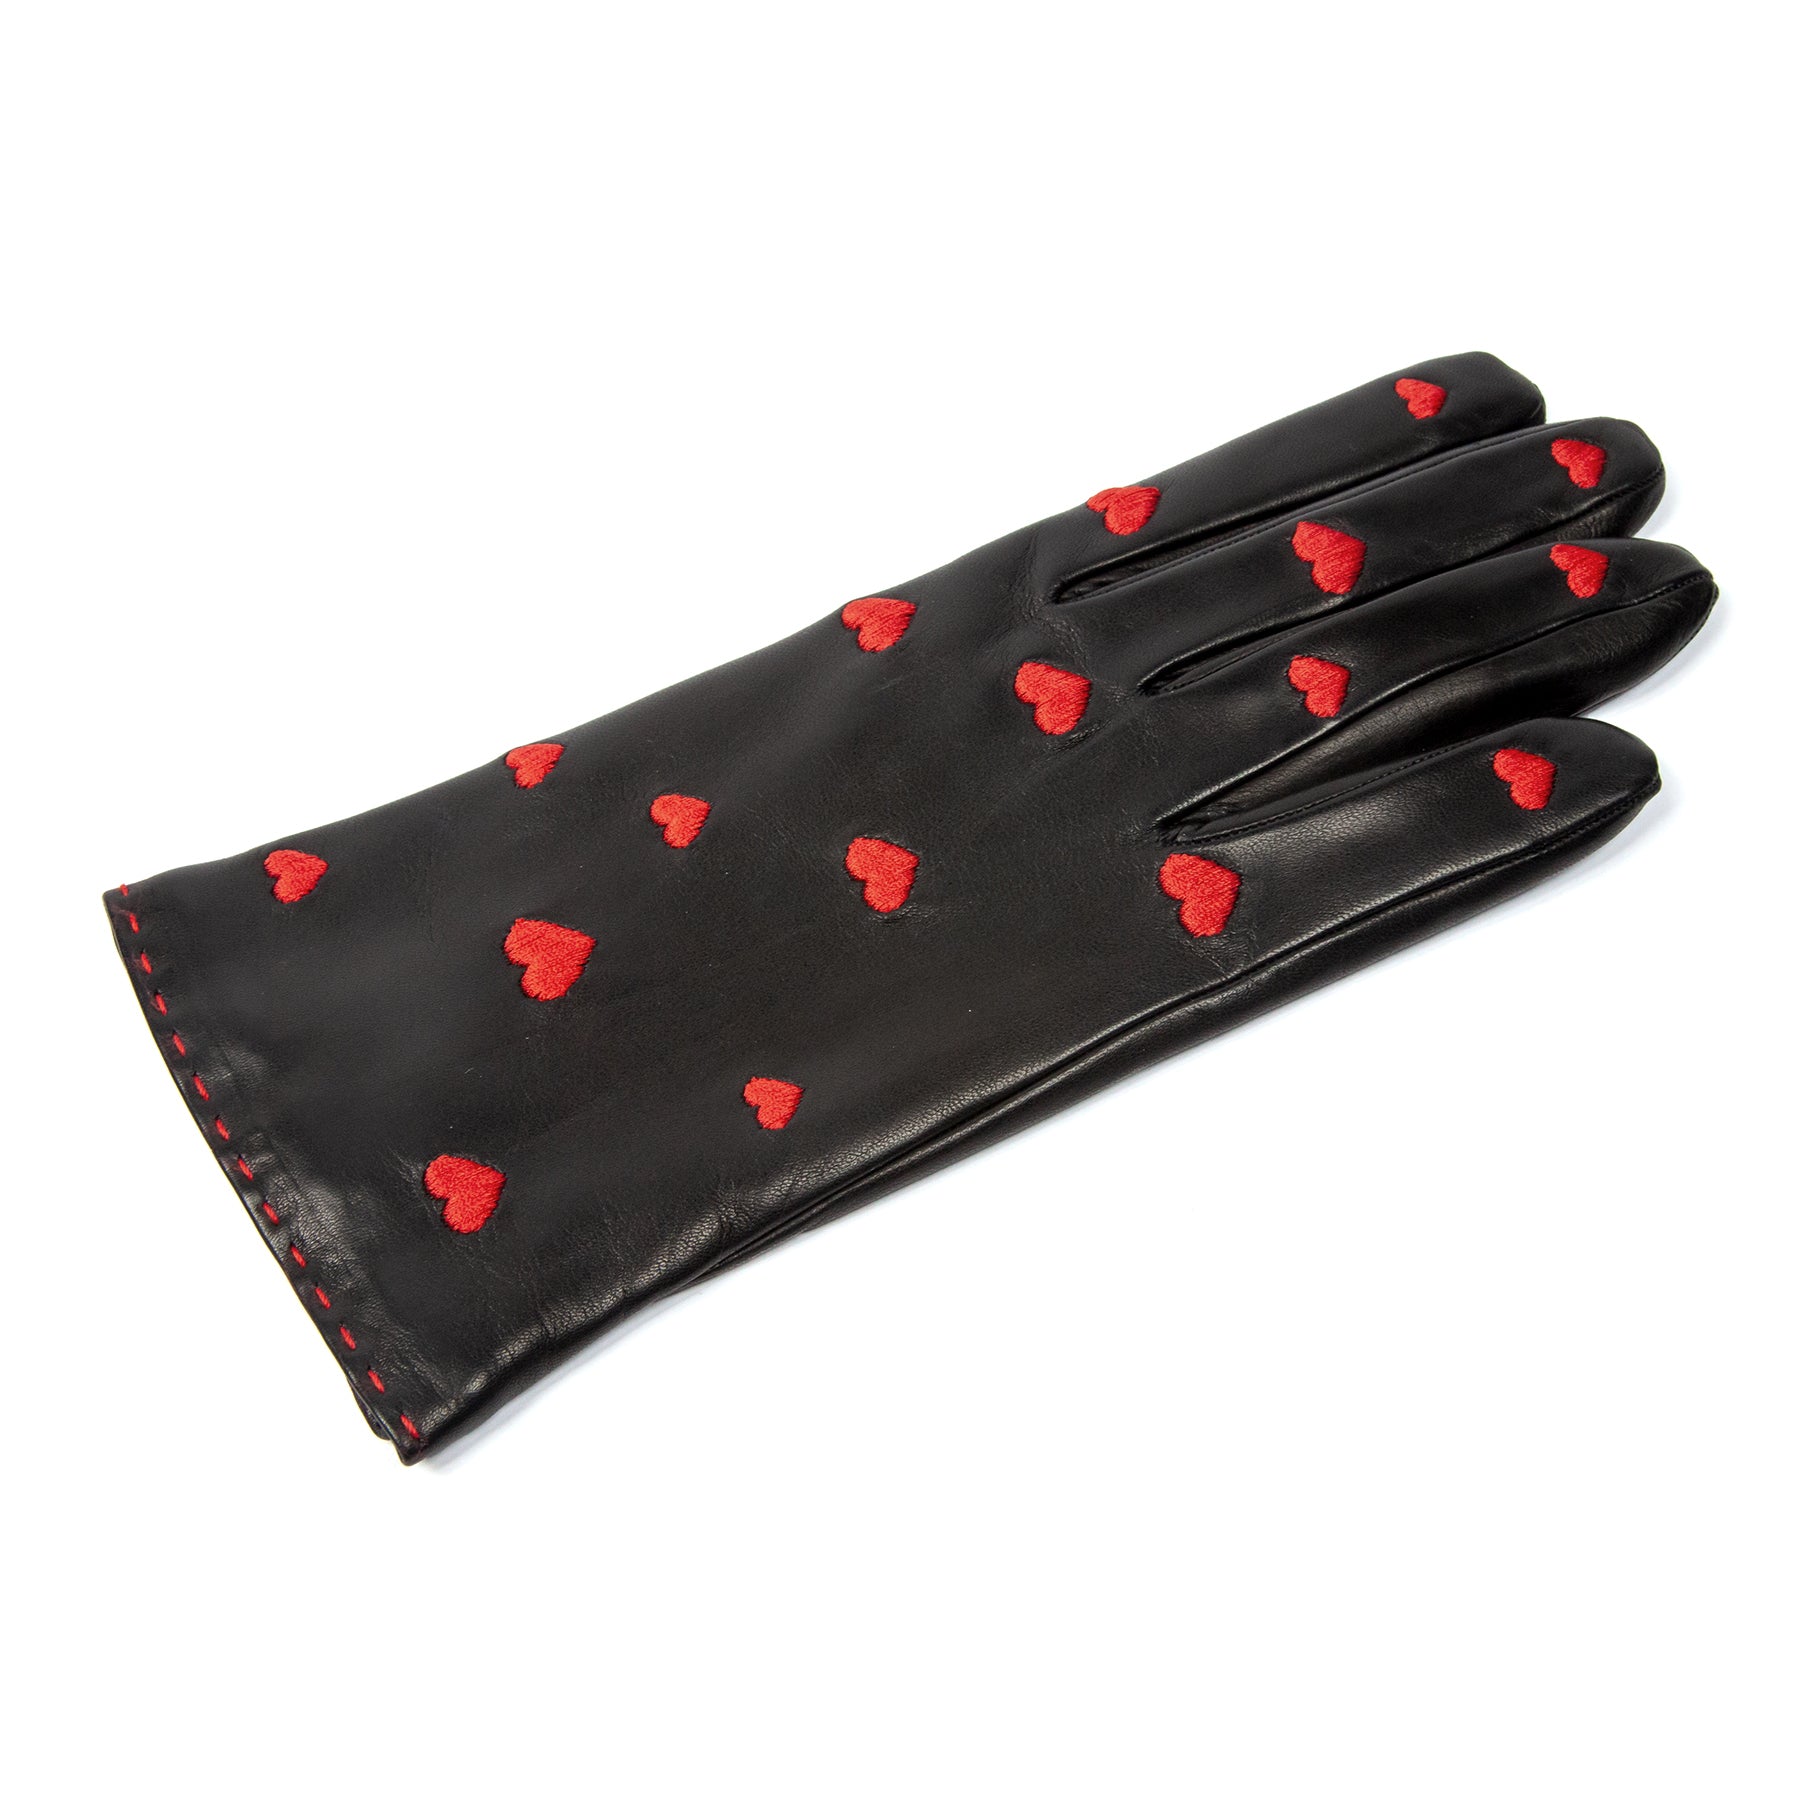 Women's black nappa leather gloves with red hearts on top red hand-stitching details and cashmere lining